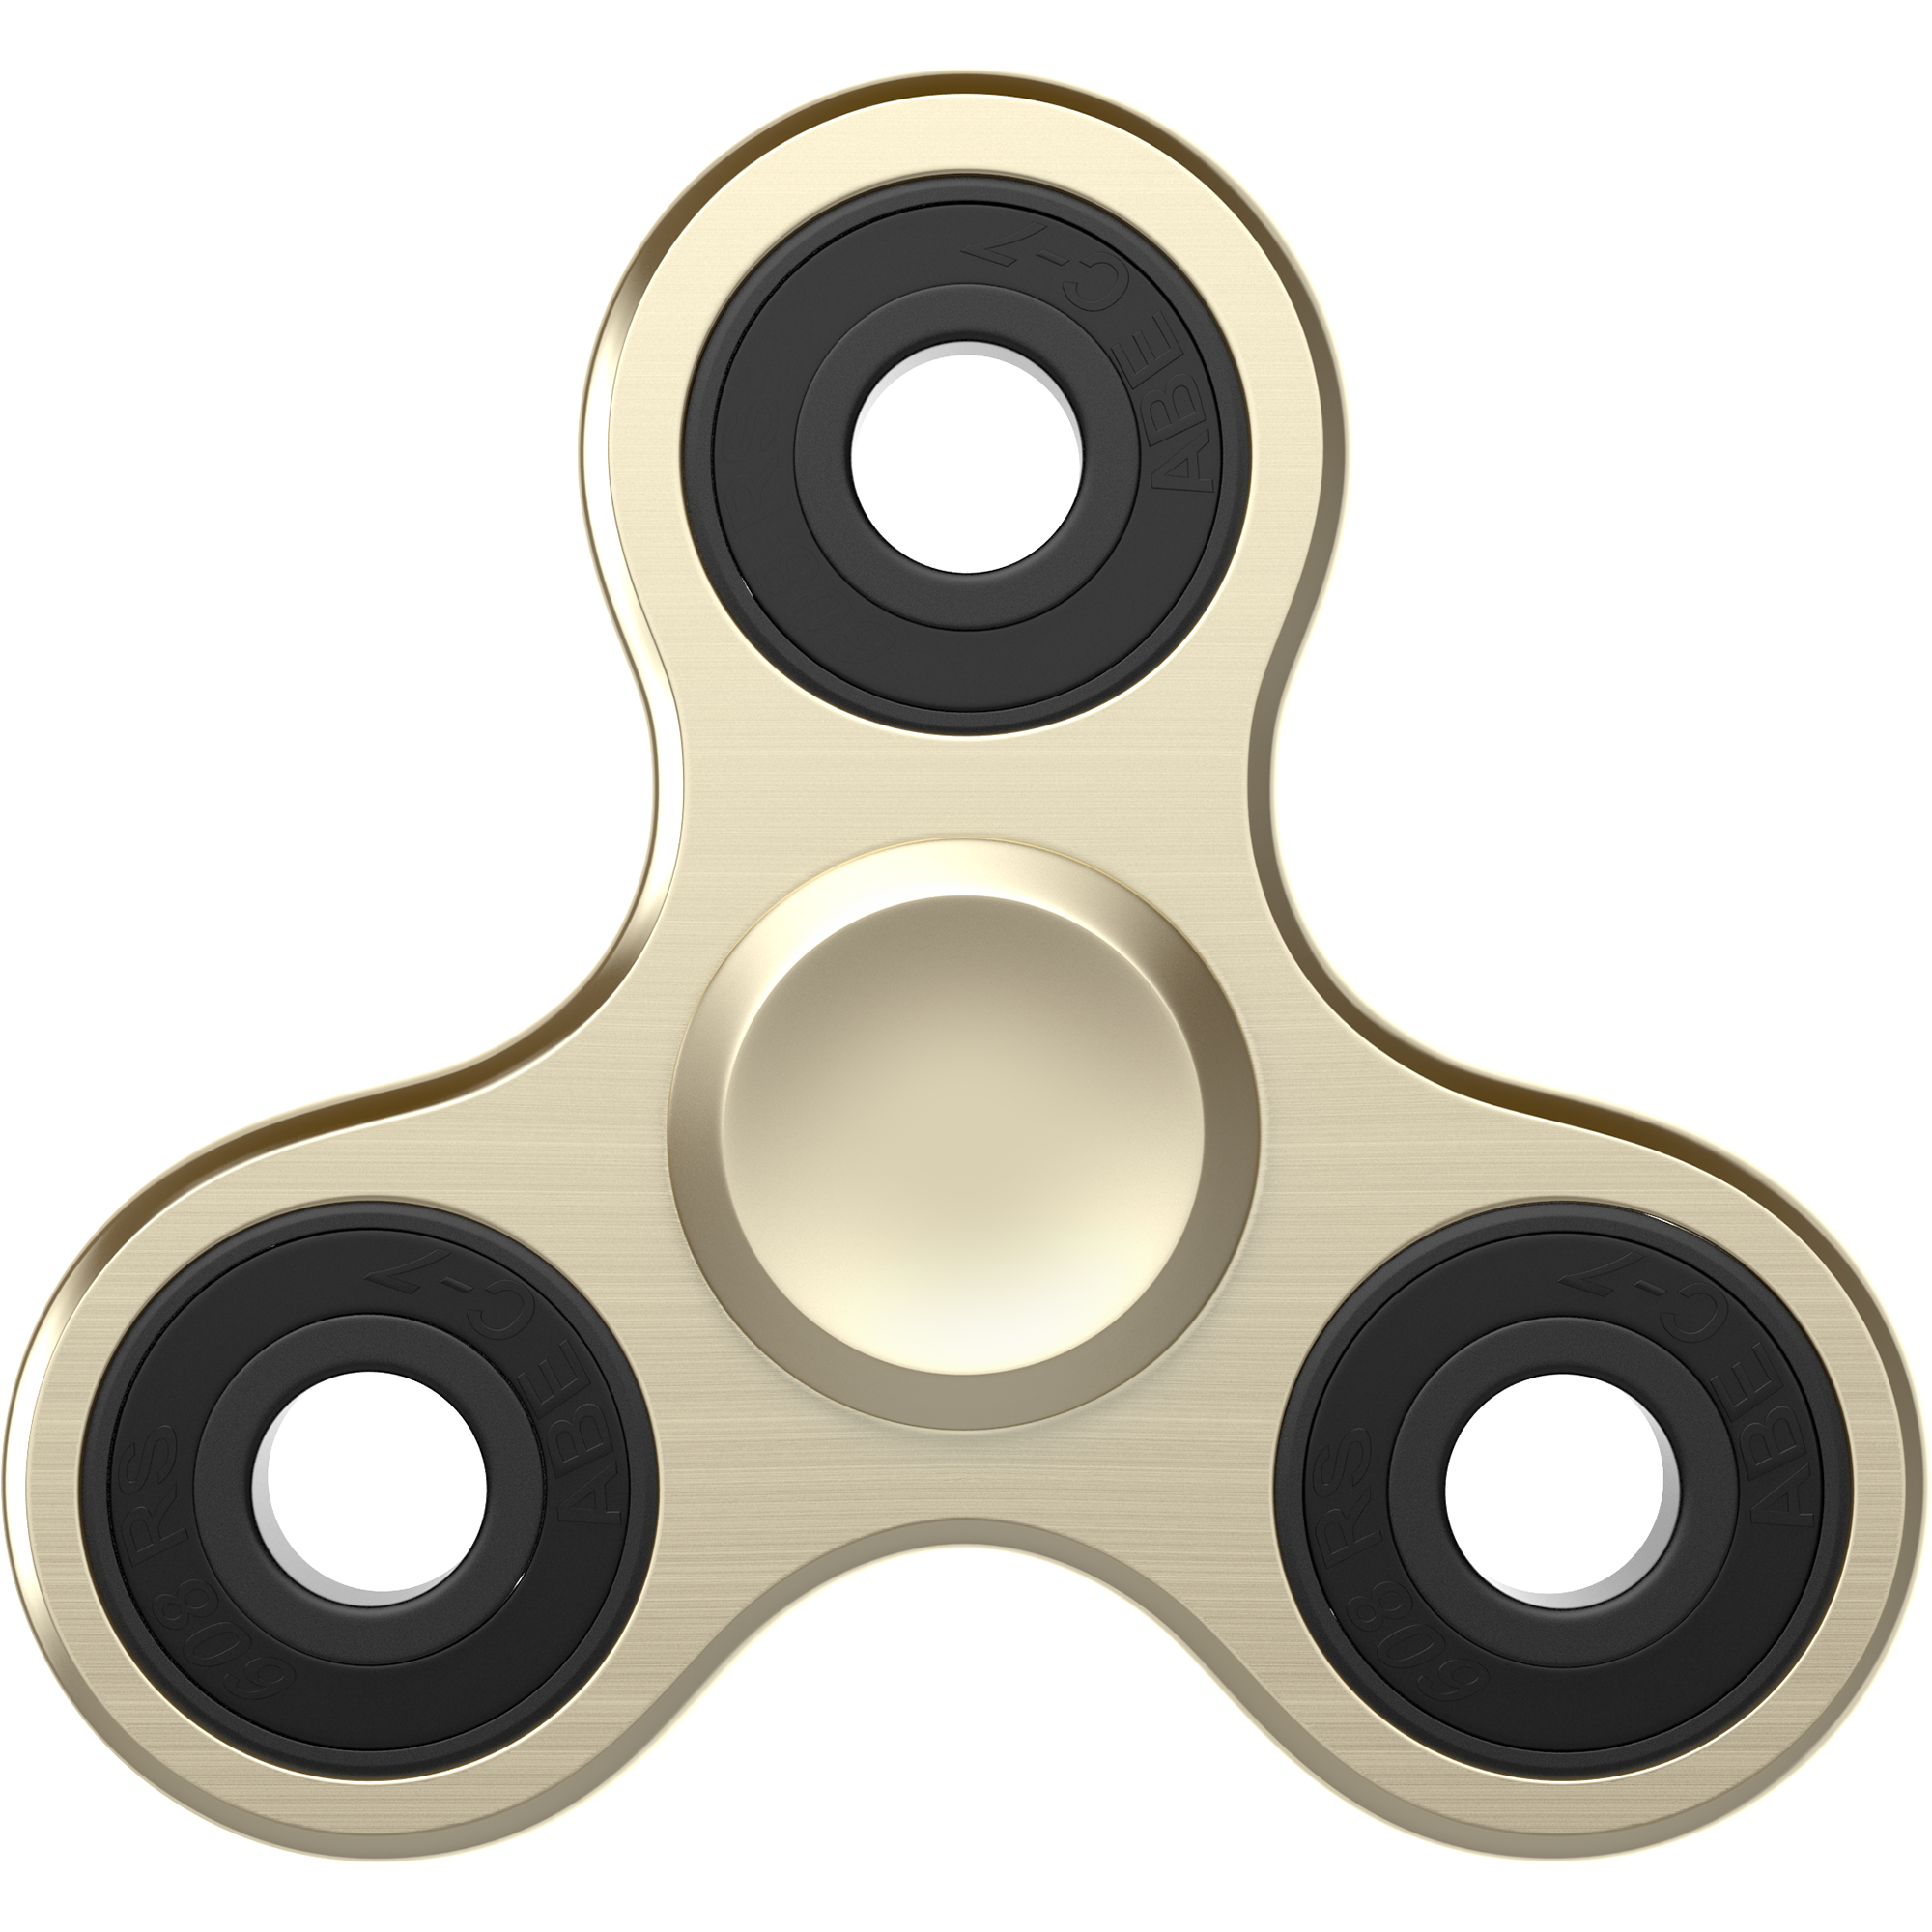 Alloy Gold 360 Spinner Focus Fidget Toy Tri-Spinner Focus Toy for Kids & Adults - image 1 of 5